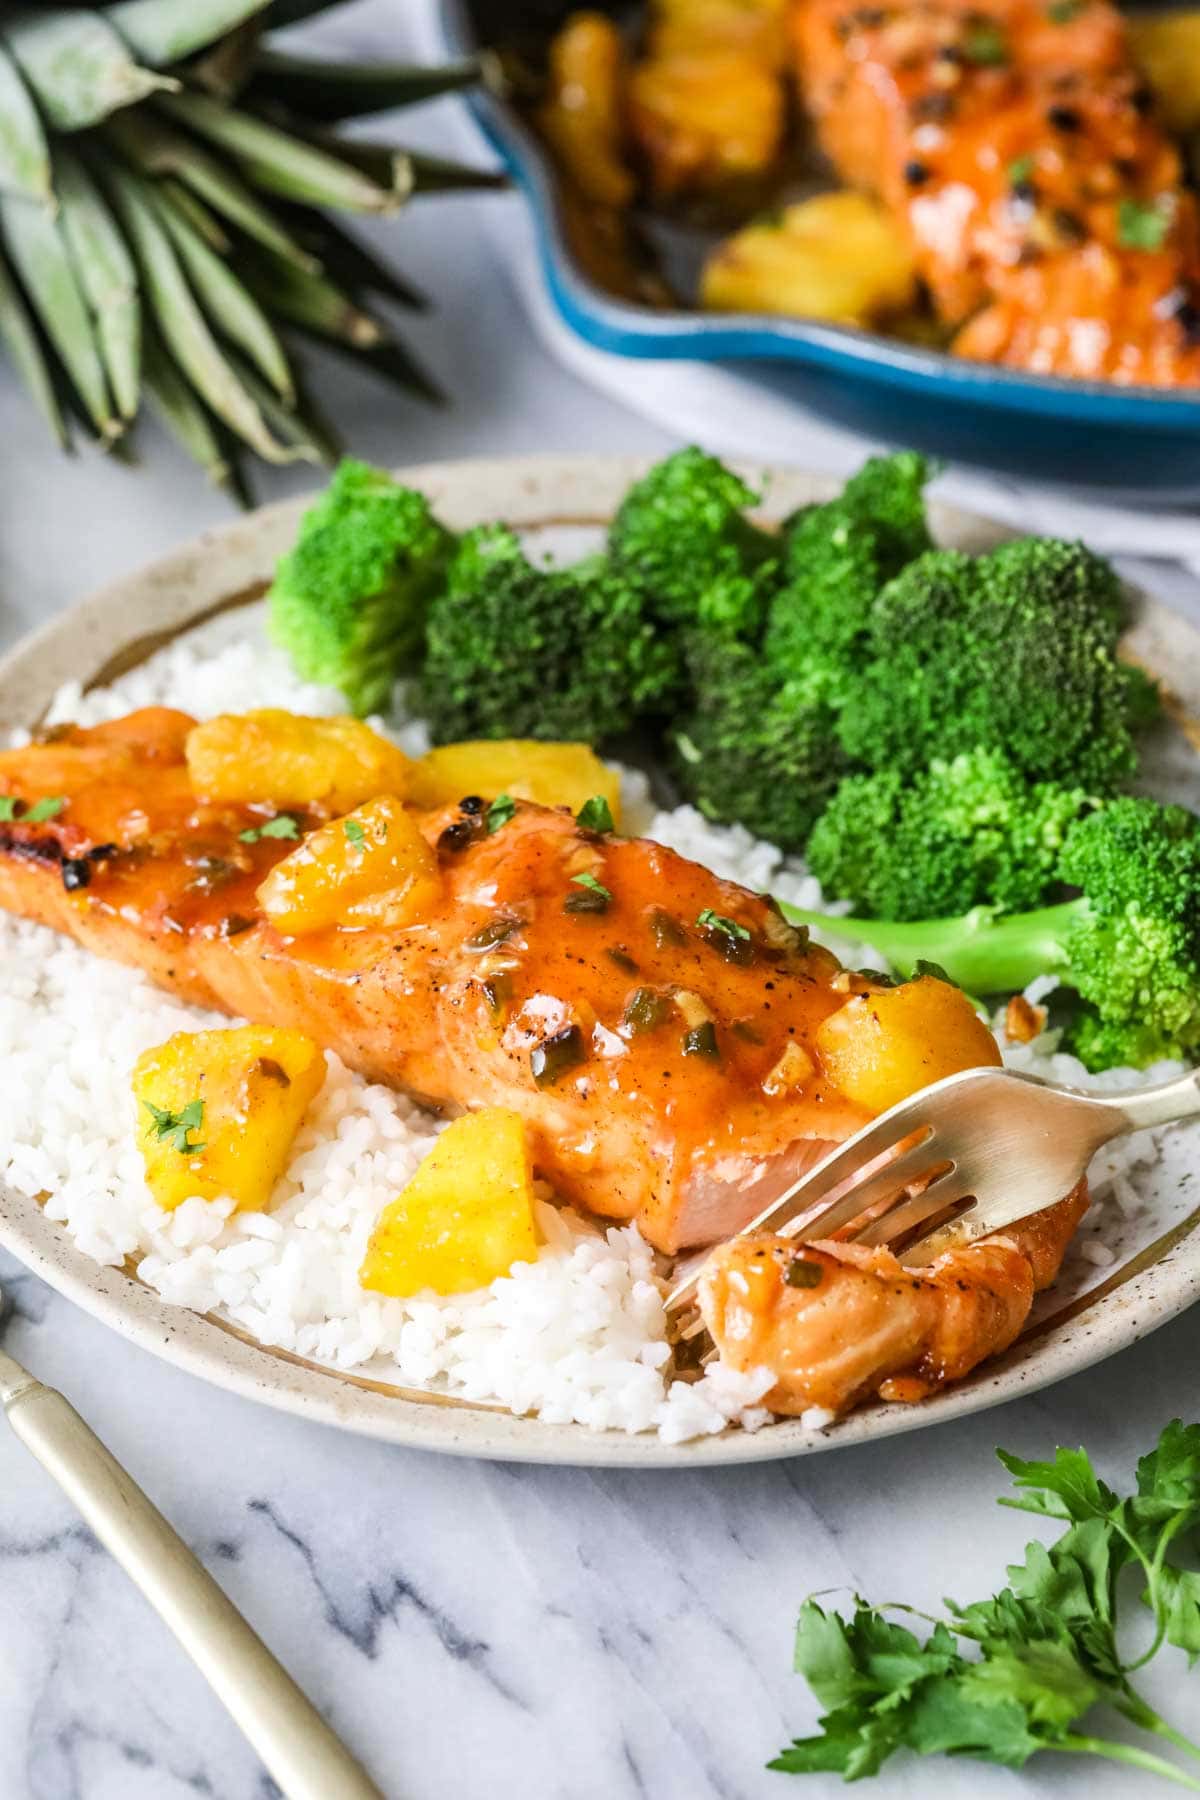 Fork cutting into maple glazed salmon served on a bed of rice with a side of broccoli.